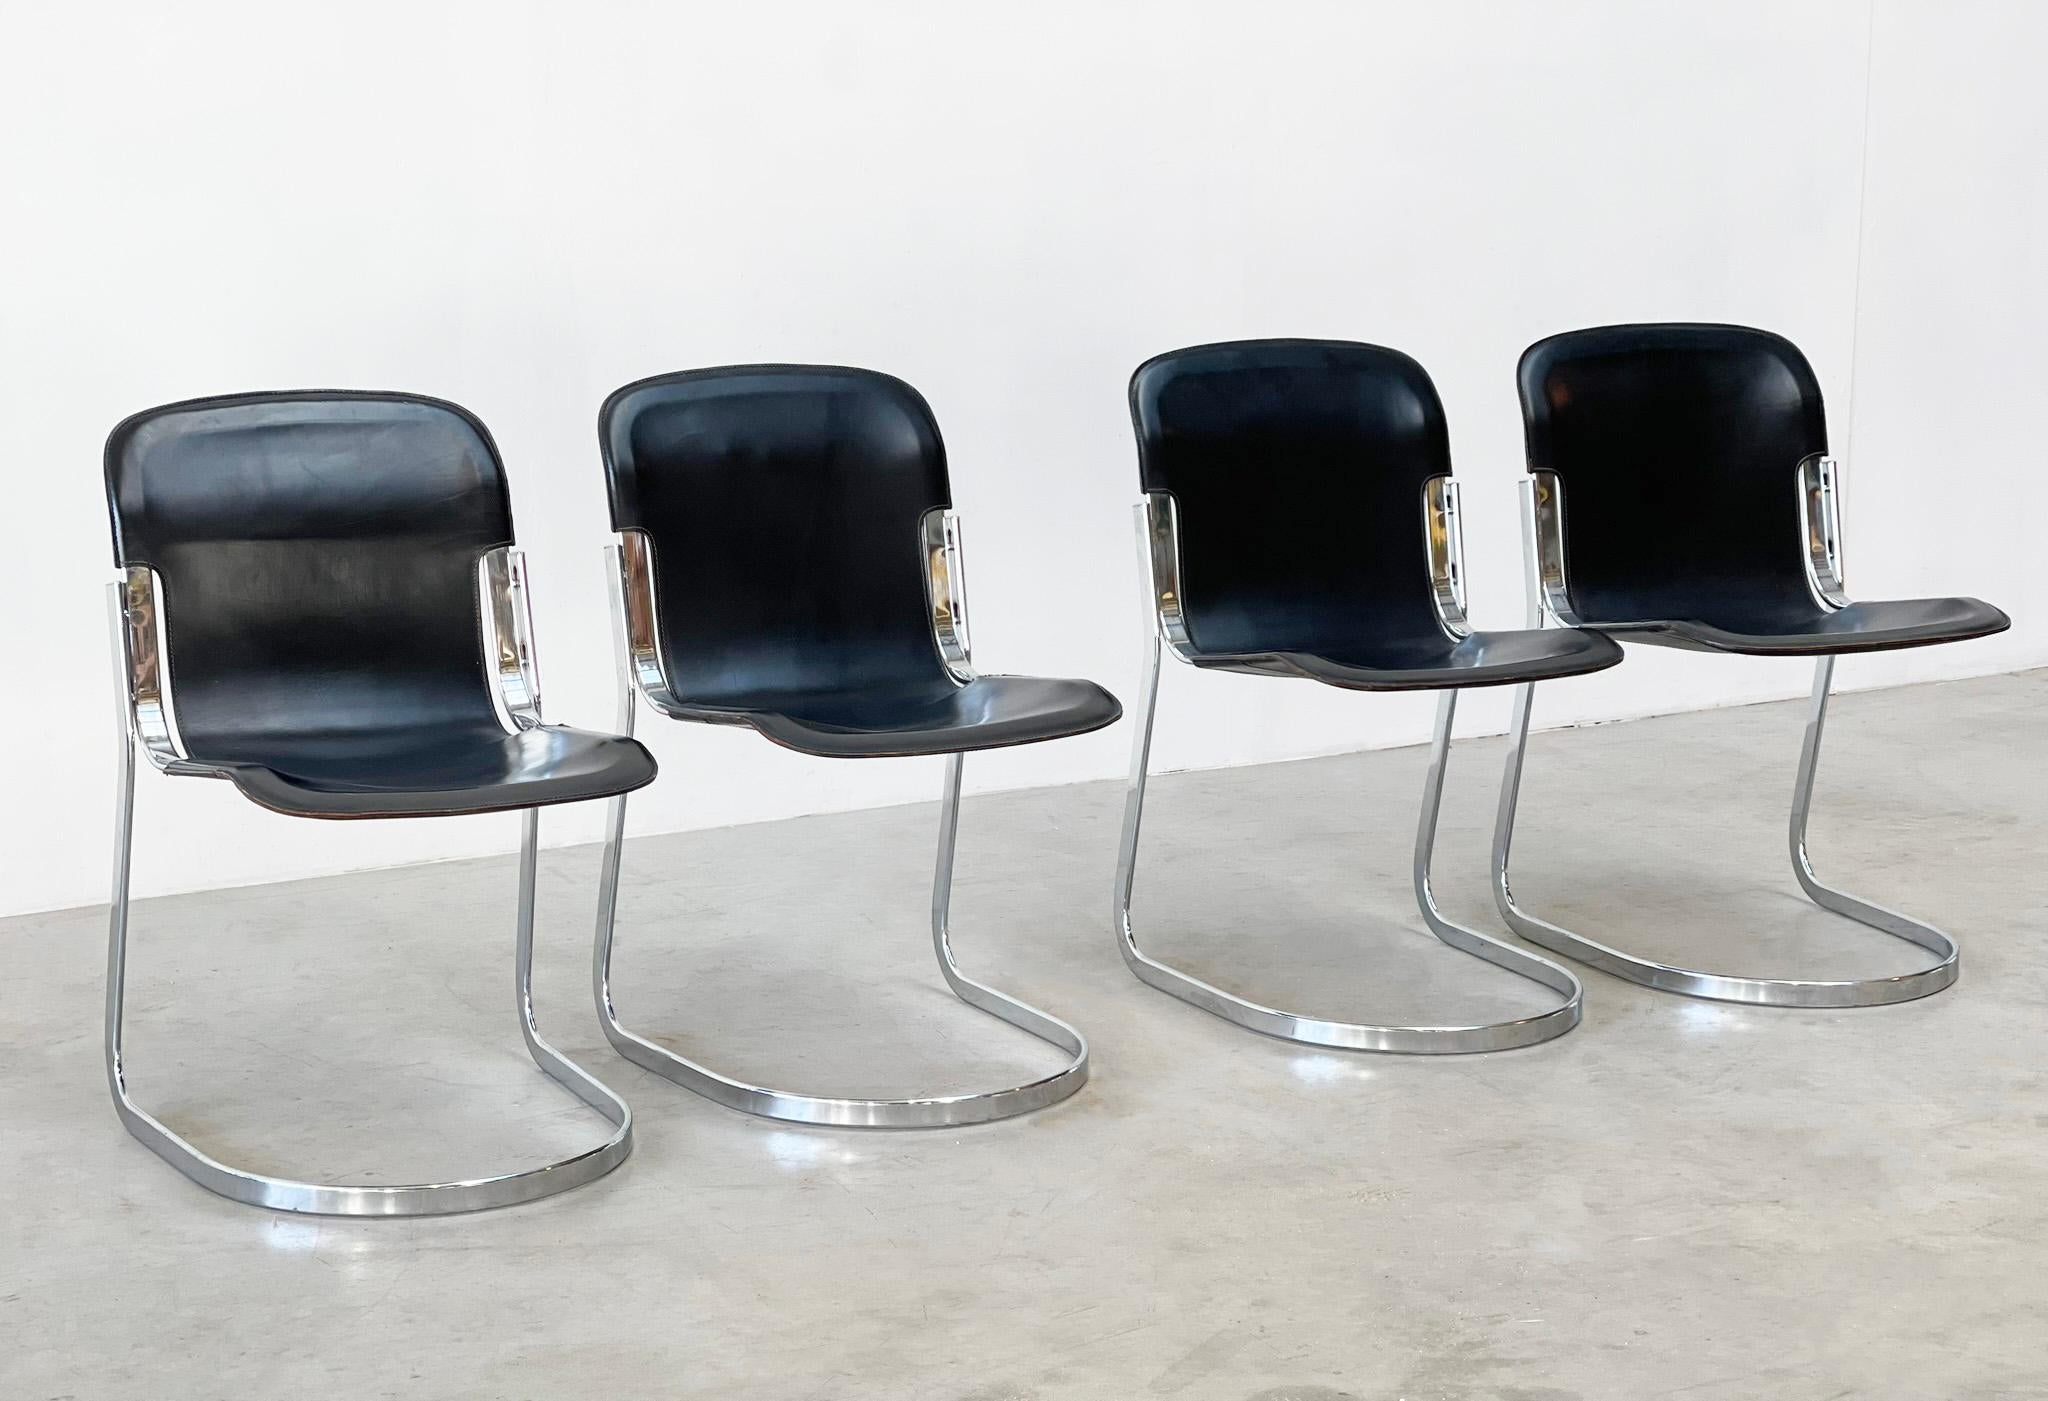 Willy Rizzo black leather dining chairs
Set of 4 dining chairs by 1 of Italy's most famous desginers. Willy Rizzo, Willy Rizzo is known for his furniture with a very high quality and luxurious feel. These chairs were designed in the 70s for the